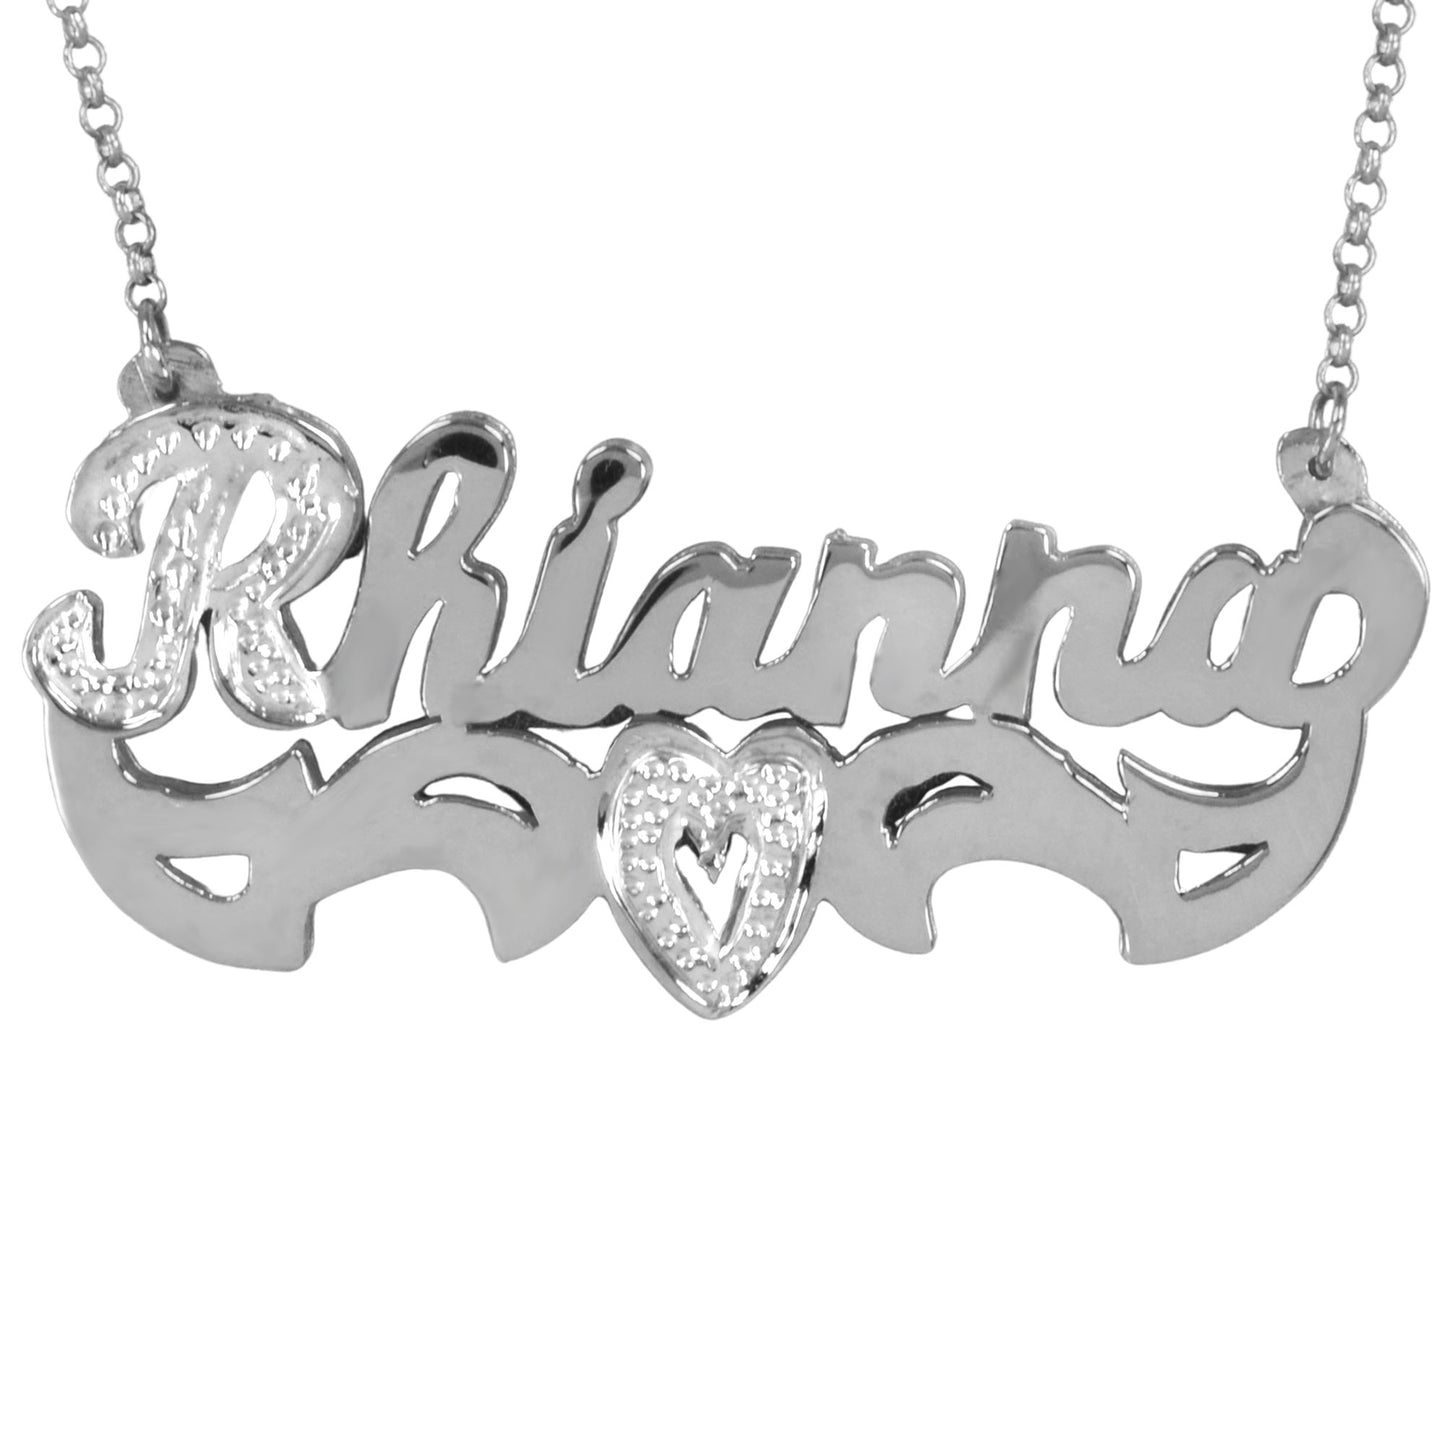 Double 3-D Personalized Nameplate with Beading in First Letter and Heart Tail